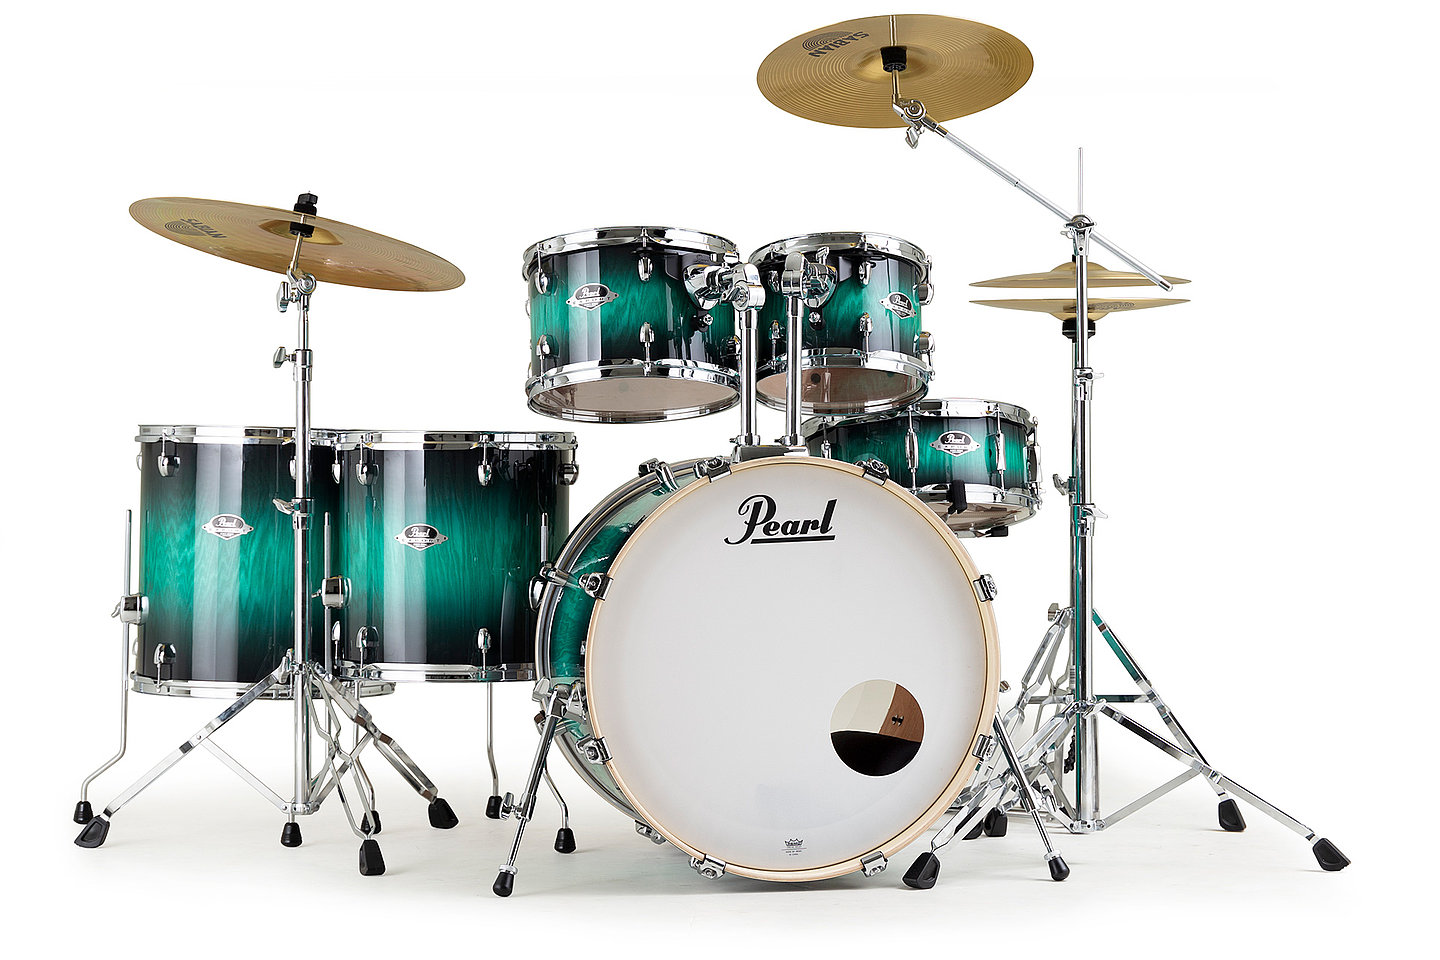 EXPORT EXA IN TEAL BLUE ASH. LIMITED EDITION.